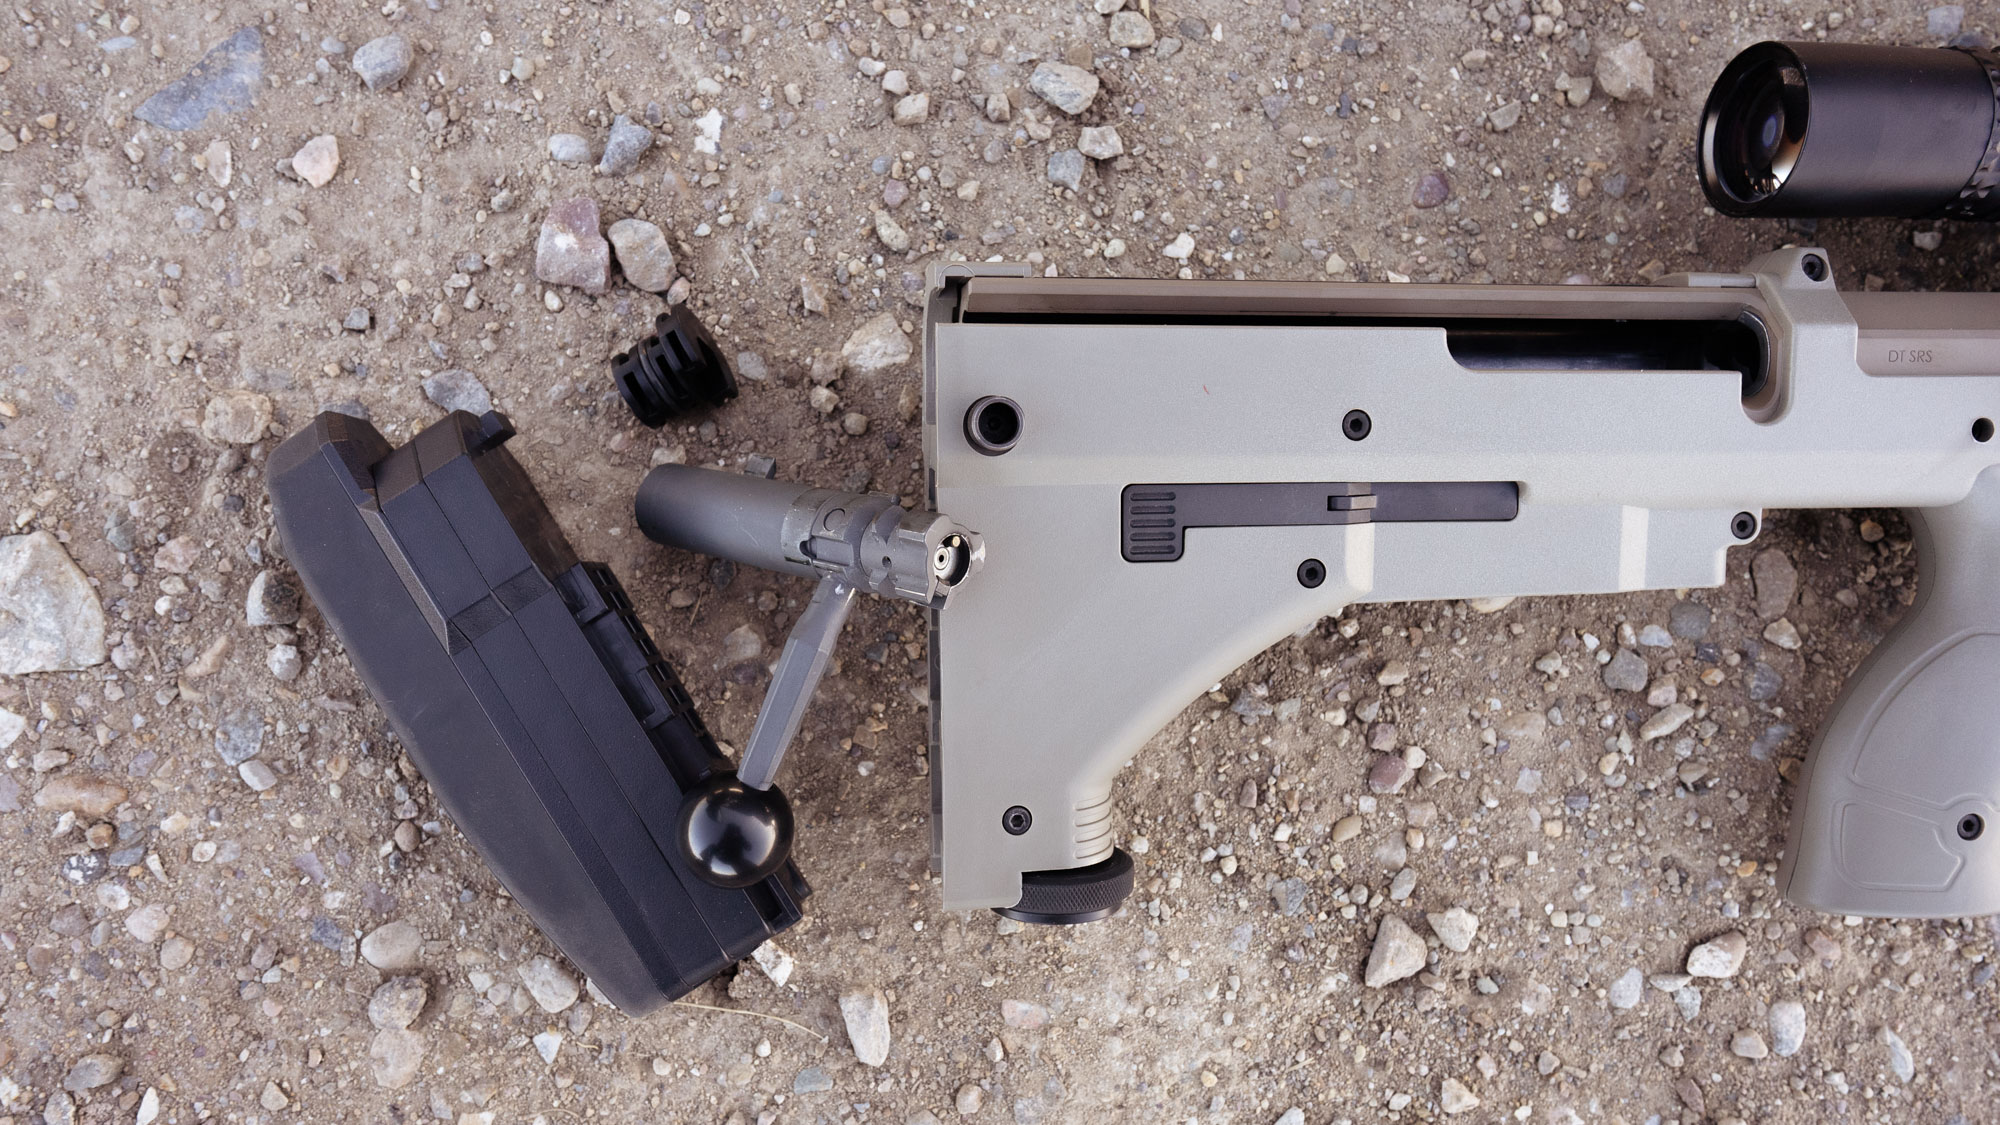 Disassembled stock on the desert tech rifle showing the recoil pad and bolt assembly